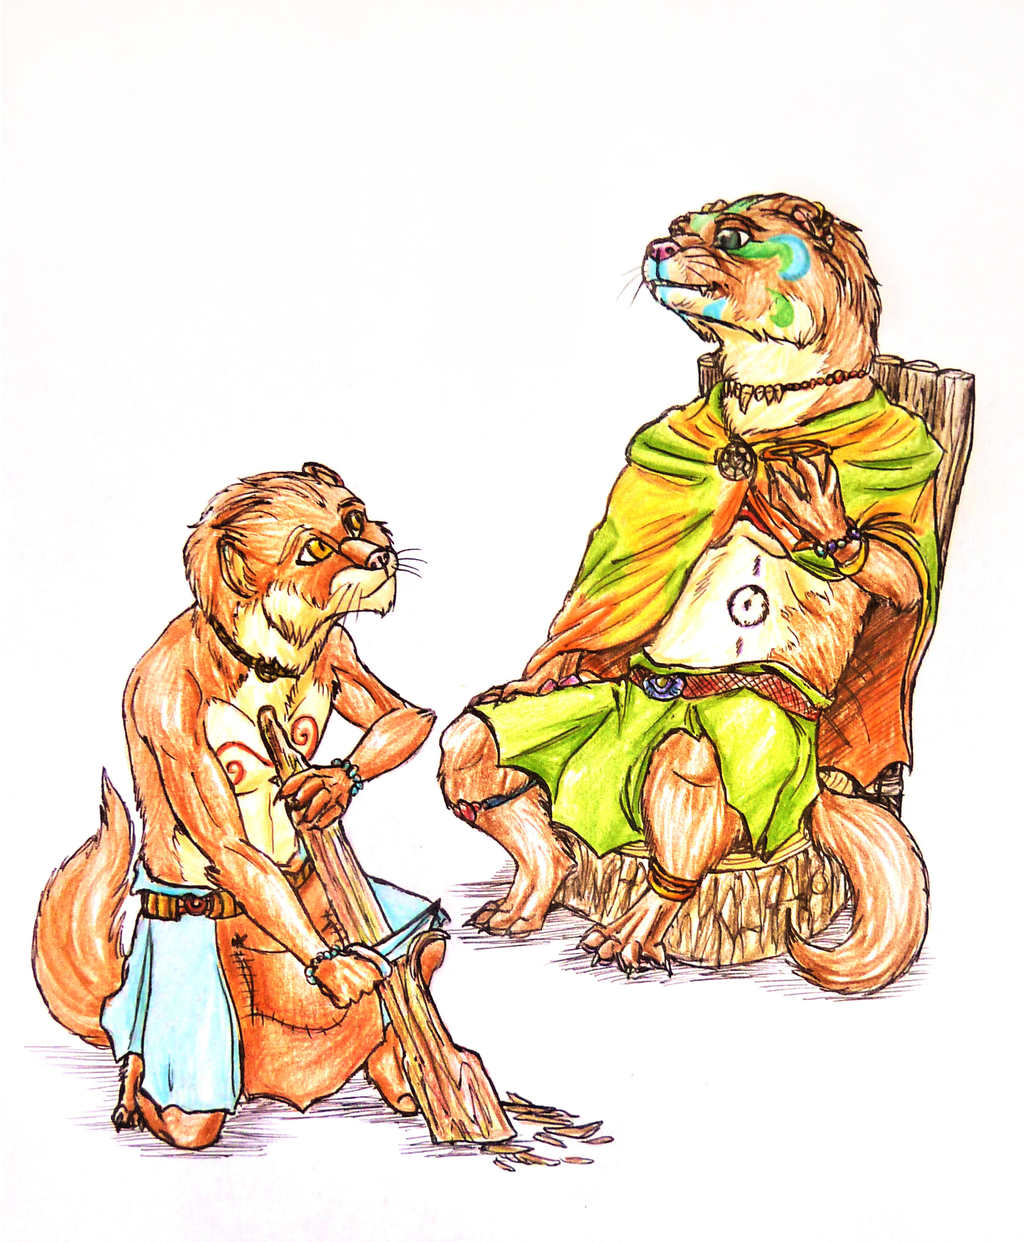 Elder and Younger Weasels